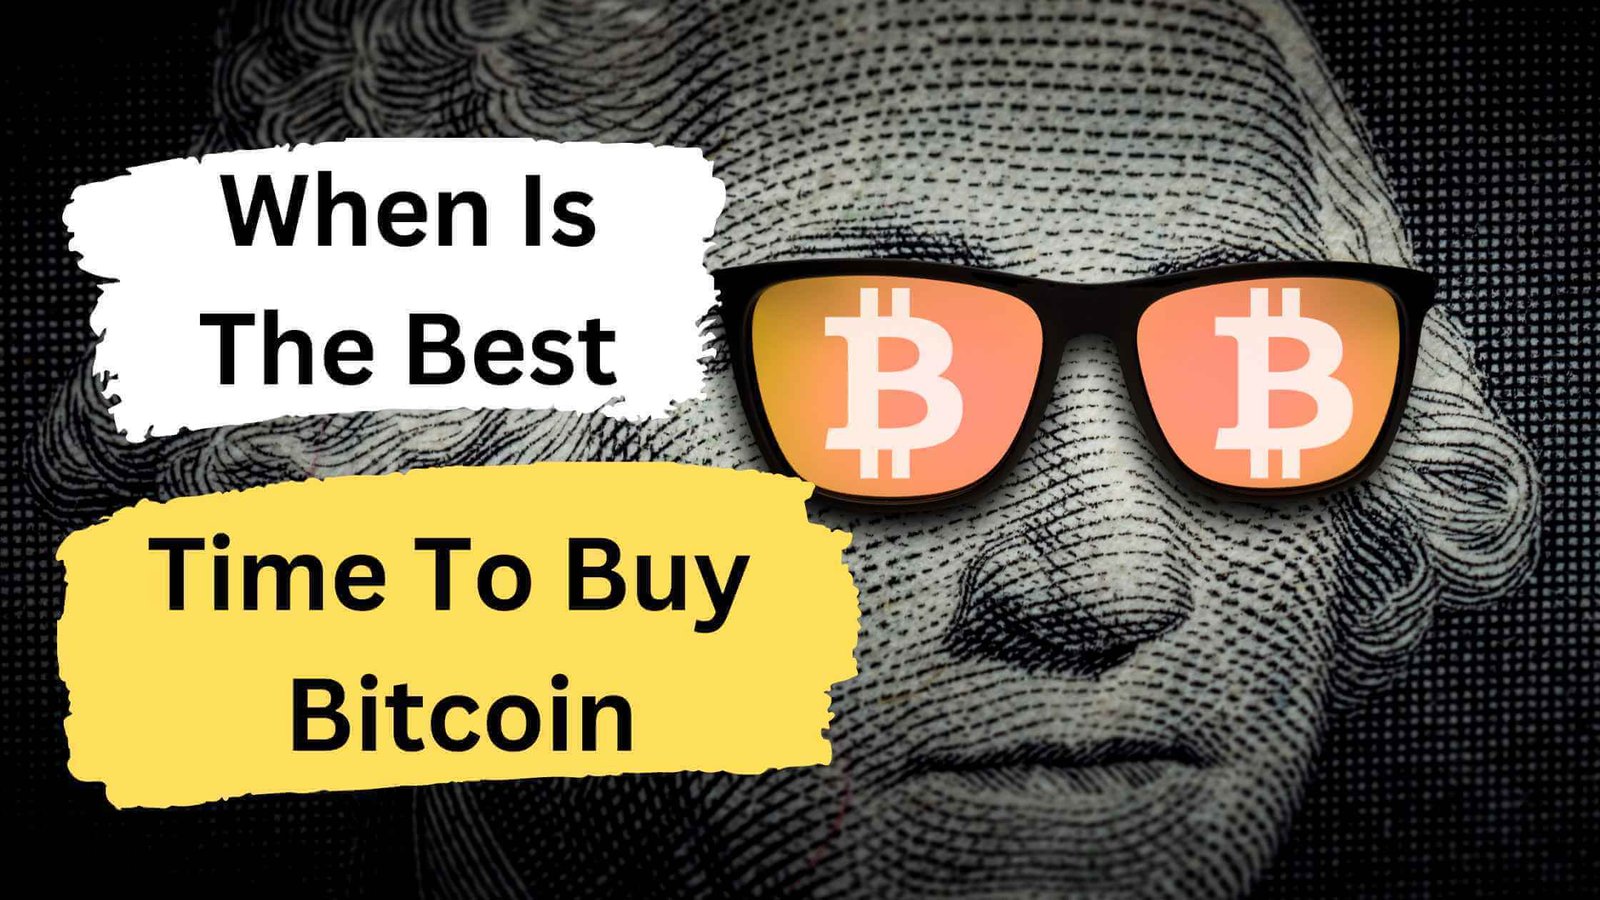 When is the Best Time to Buy Bitcoin